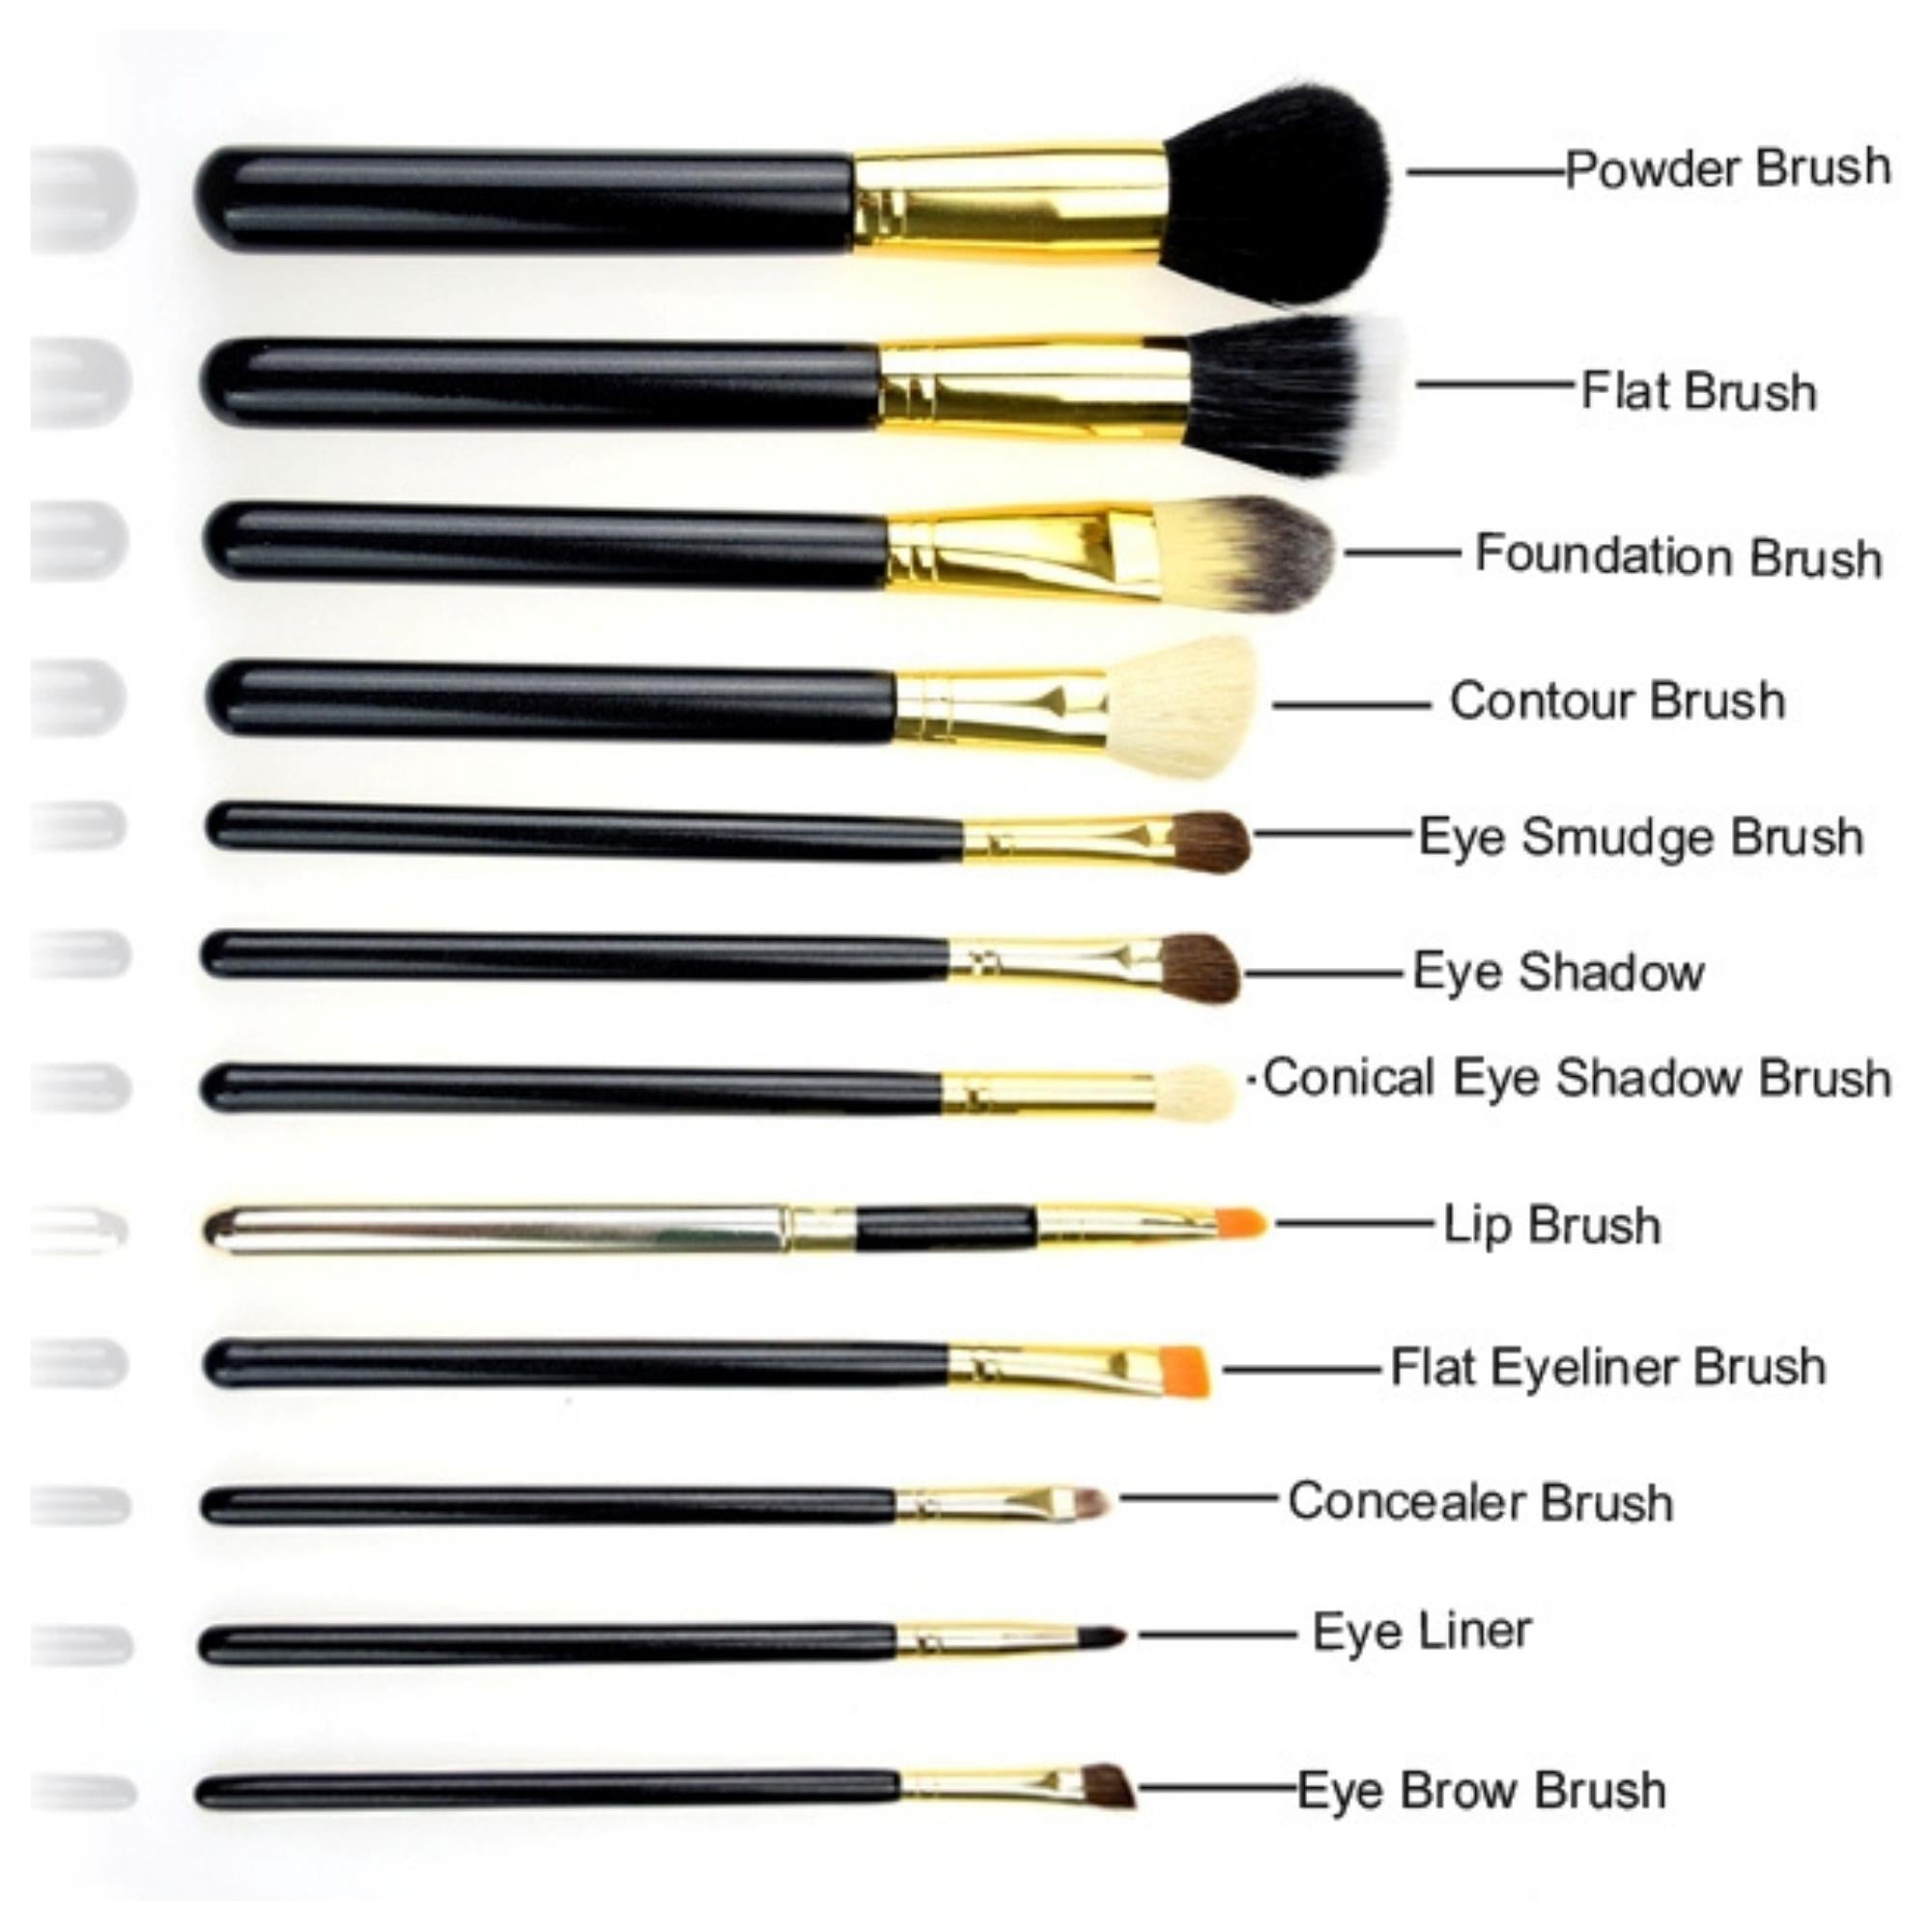 12-Piece Travel Professional Makeup Brushes Set with Case